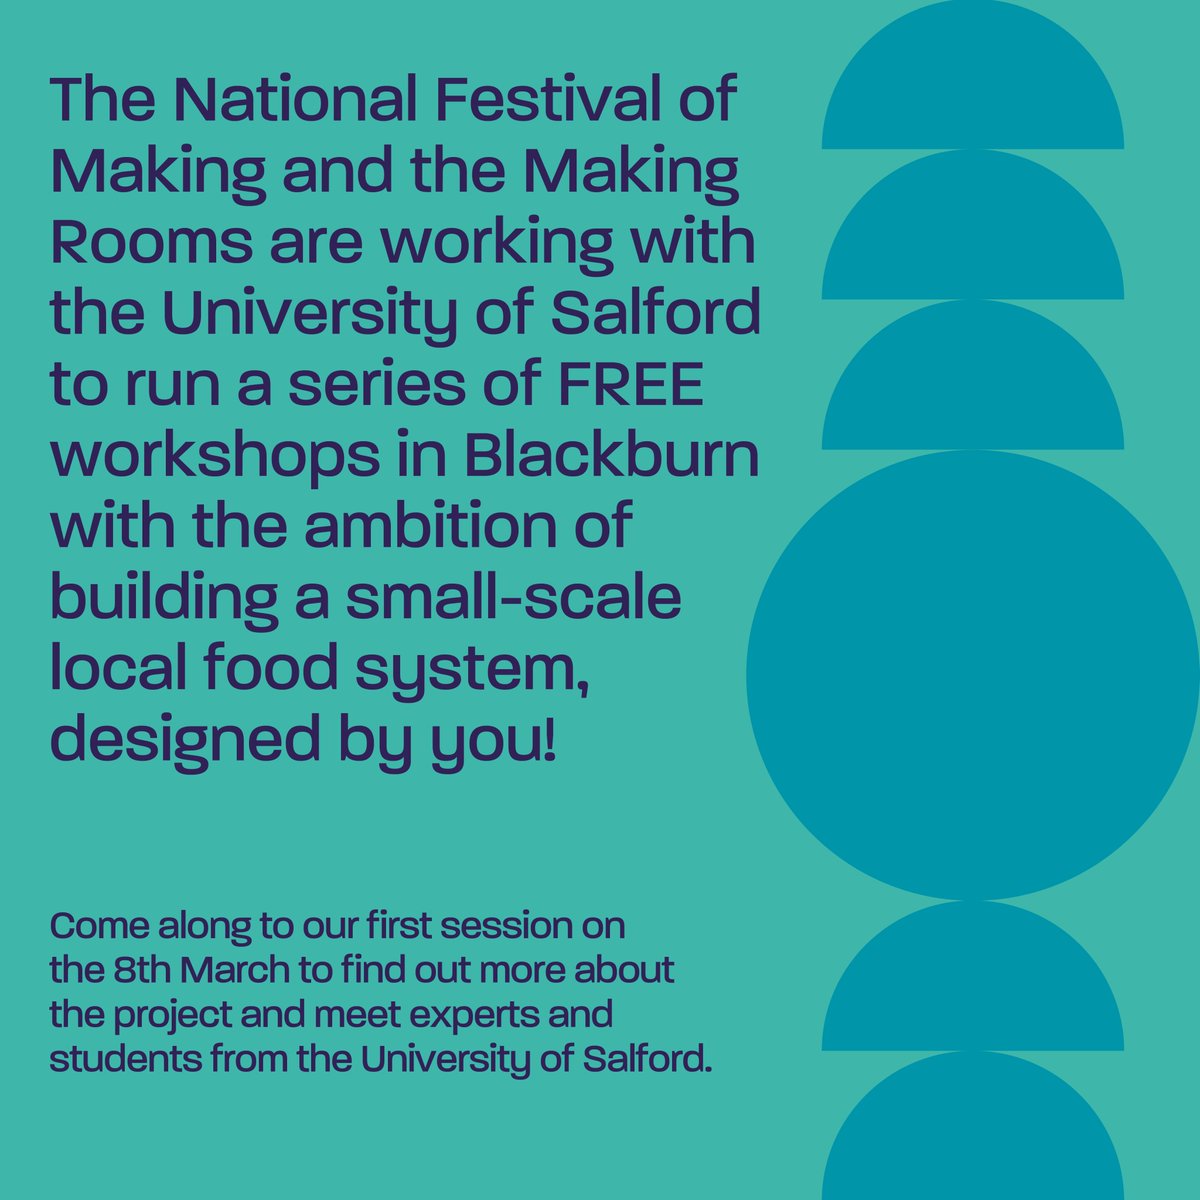 Are you interested in growing food, or the opportunity to grow food in your local area? The National Festival of Making and the Making Rooms are working with the University of Salford to run a series of FREE workshops in Blackburn. Sign up here - eventbrite.co.uk/e/blackburn-ur…